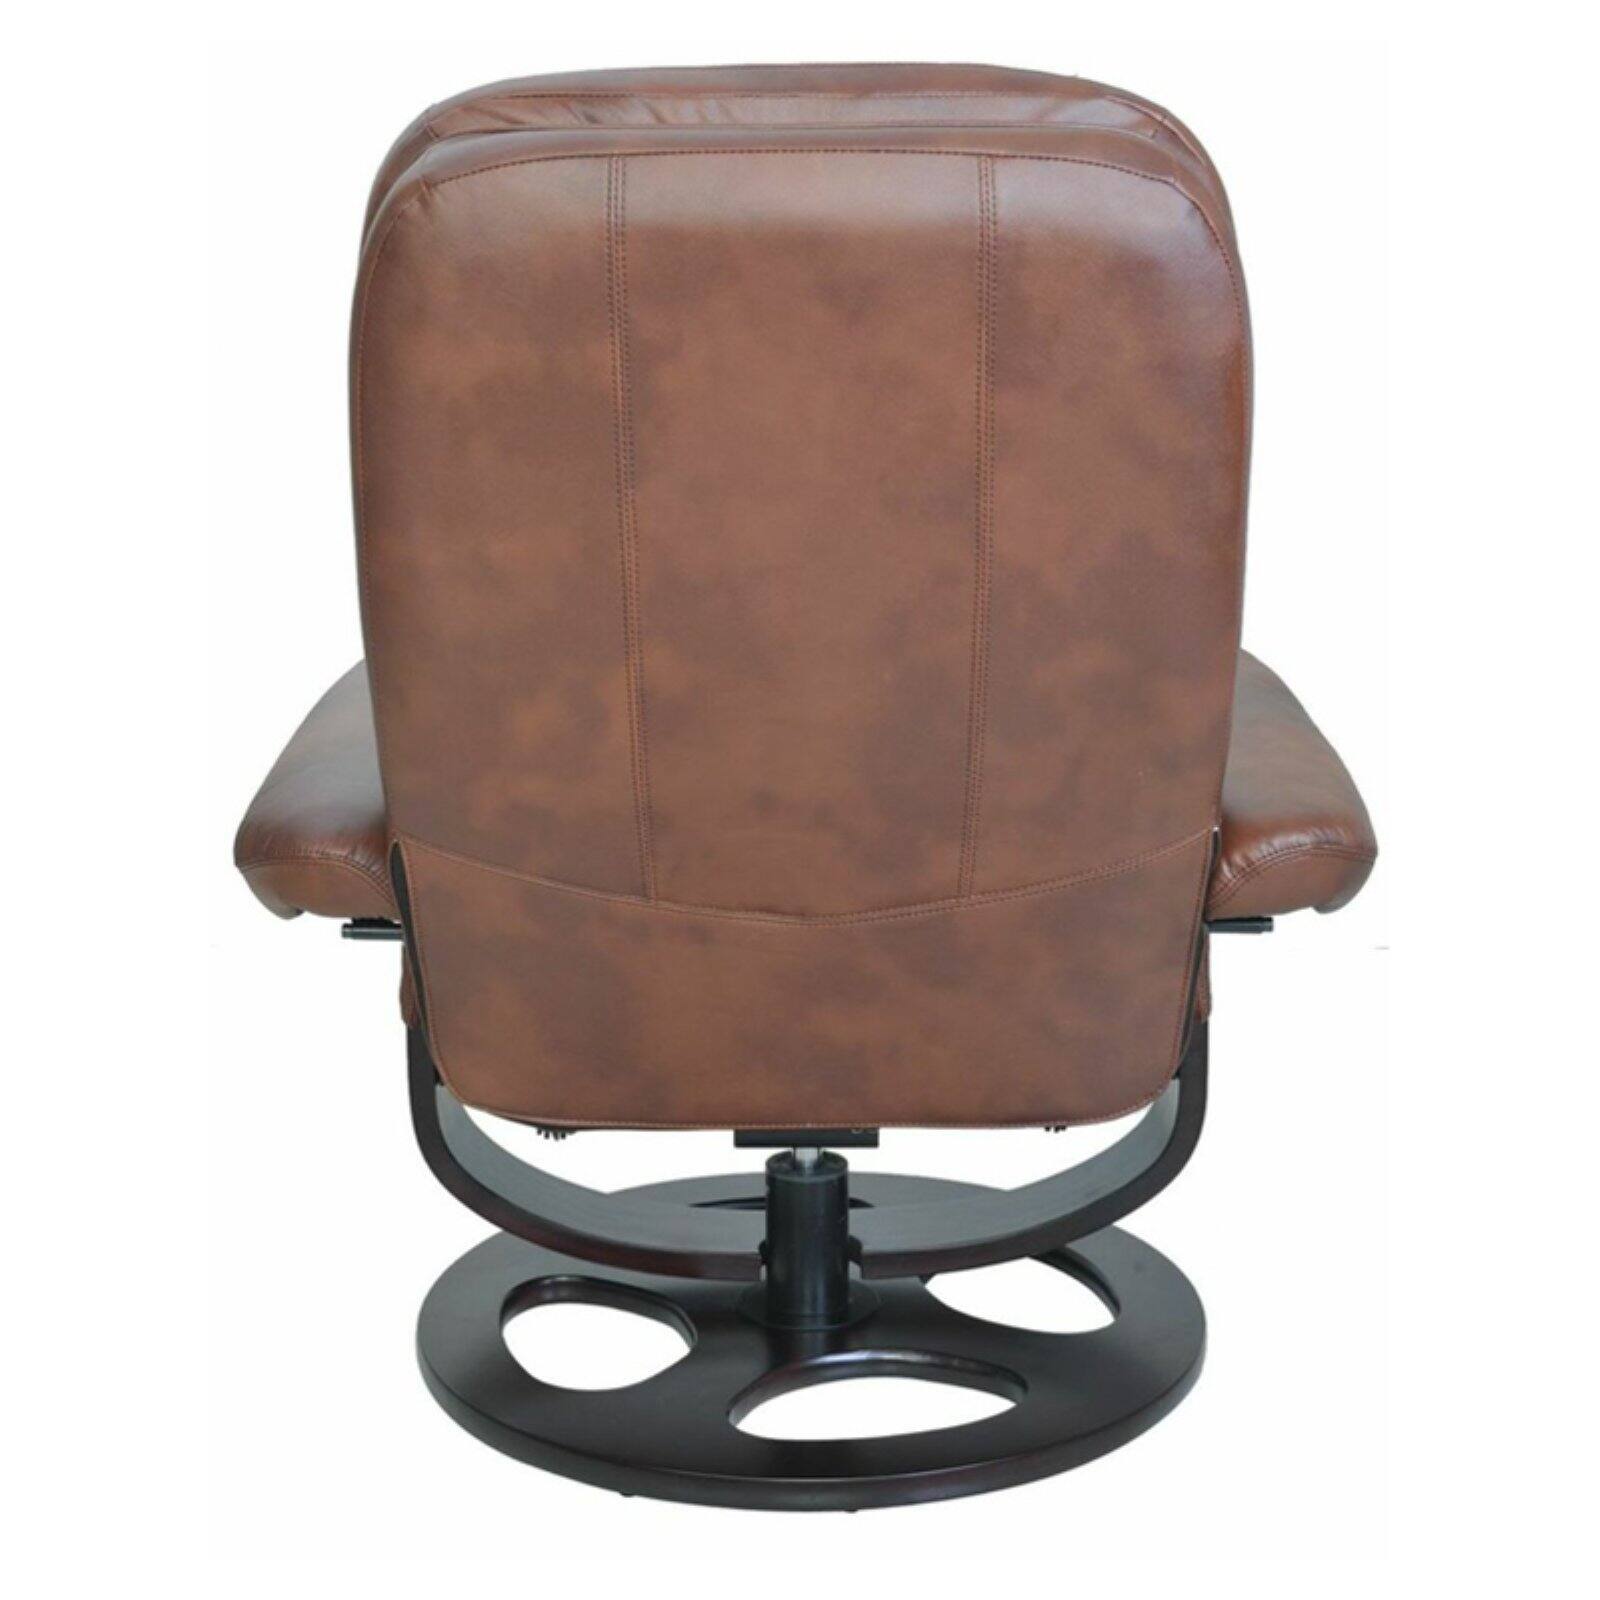 Barcalounger 15-8021 Jacque Swivel Pedestal Recliner w/Ottoman, Whiskey - image 4 of 9